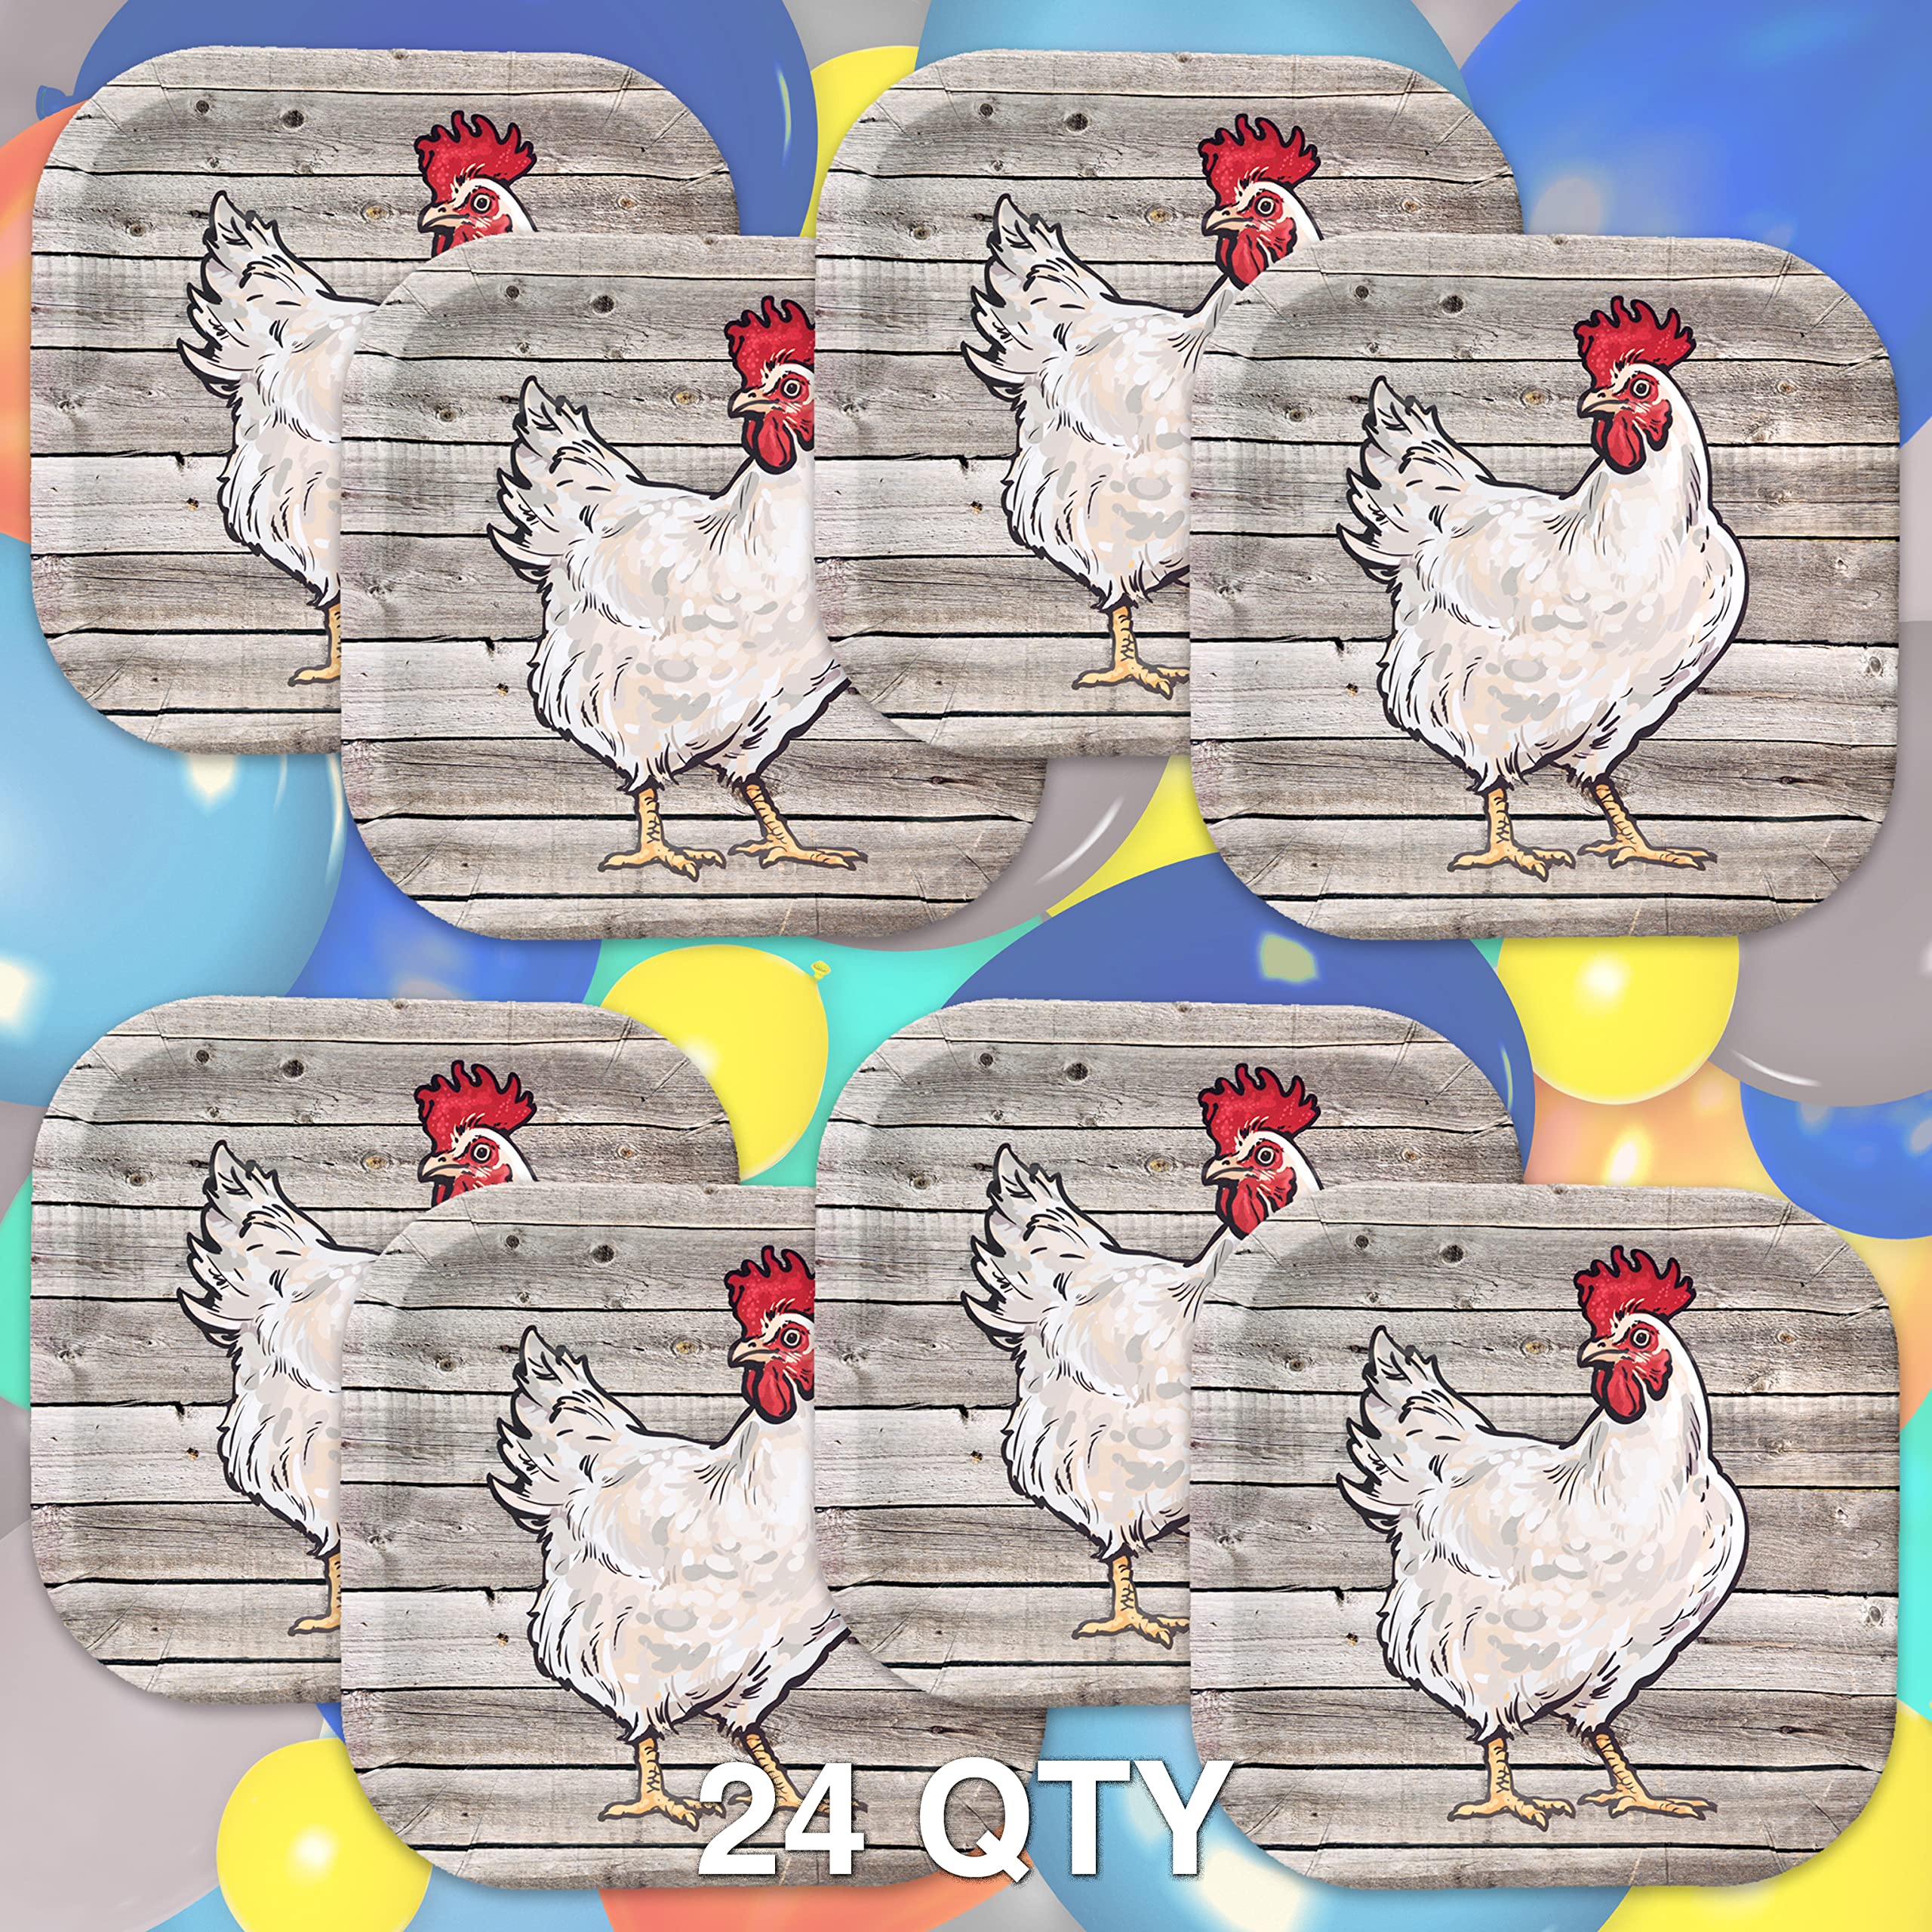 Havercamp Chicken 9” Plates on Barnwood (24 pcs.)! Authentic and Clucky Chicken on a Rustic Barnwood Background. 24 Lg. 9 in. Square Dinner Plates. Pair with the Farm Table Collection!